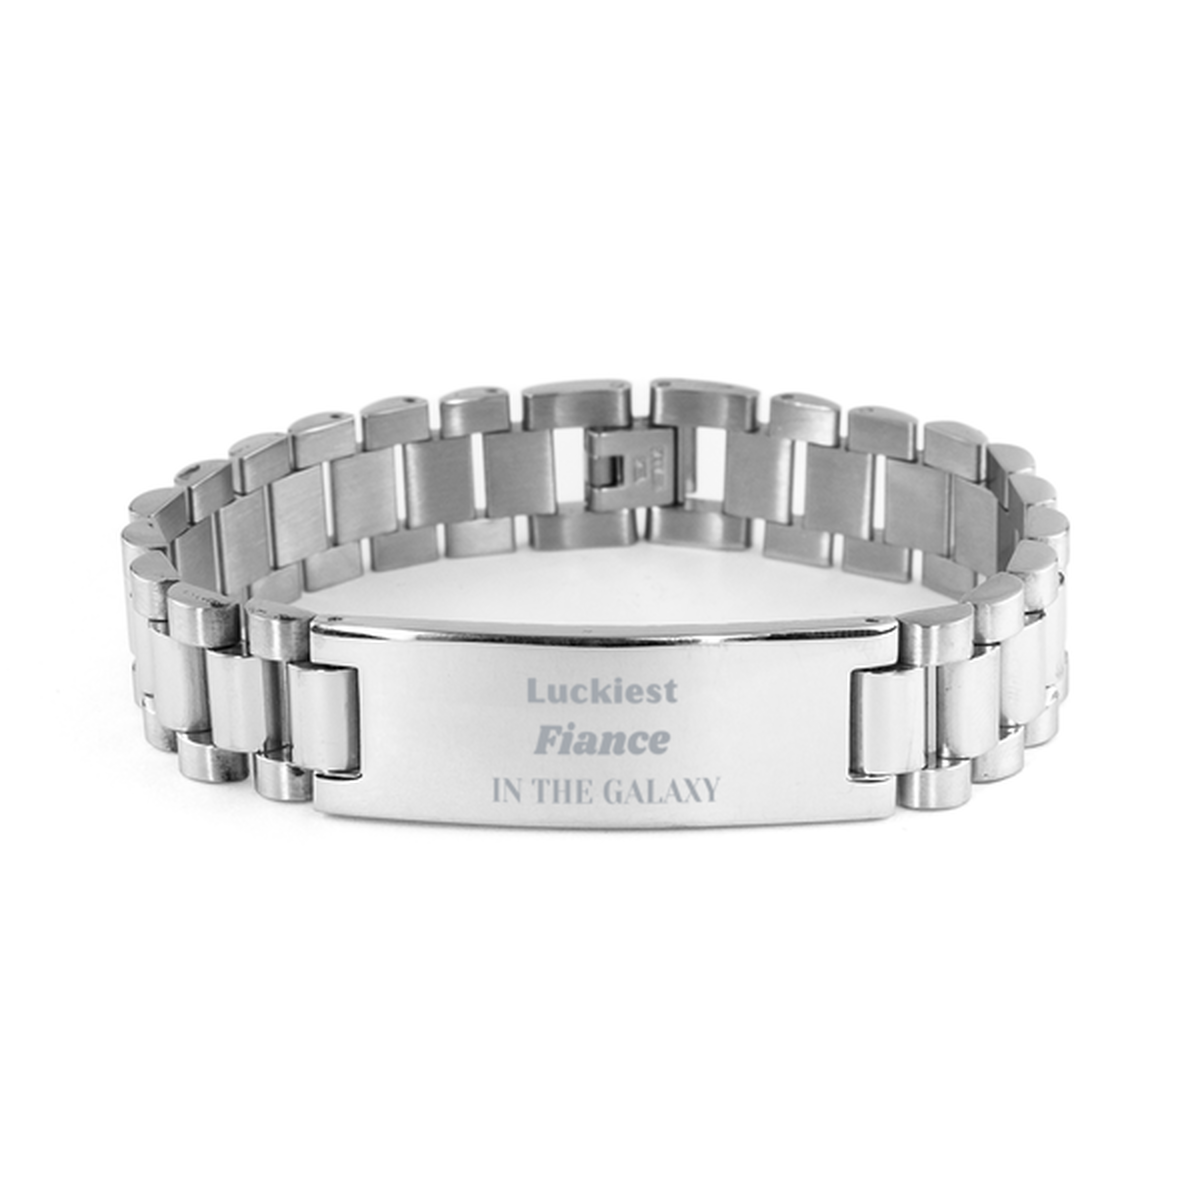 Luckiest Fiance in the Galaxy, To My Fiance Engraved Gifts, Christmas Fiance Ladder Stainless Steel Bracelet Gifts, X-mas Birthday Unique Gifts For Fiance Men Women